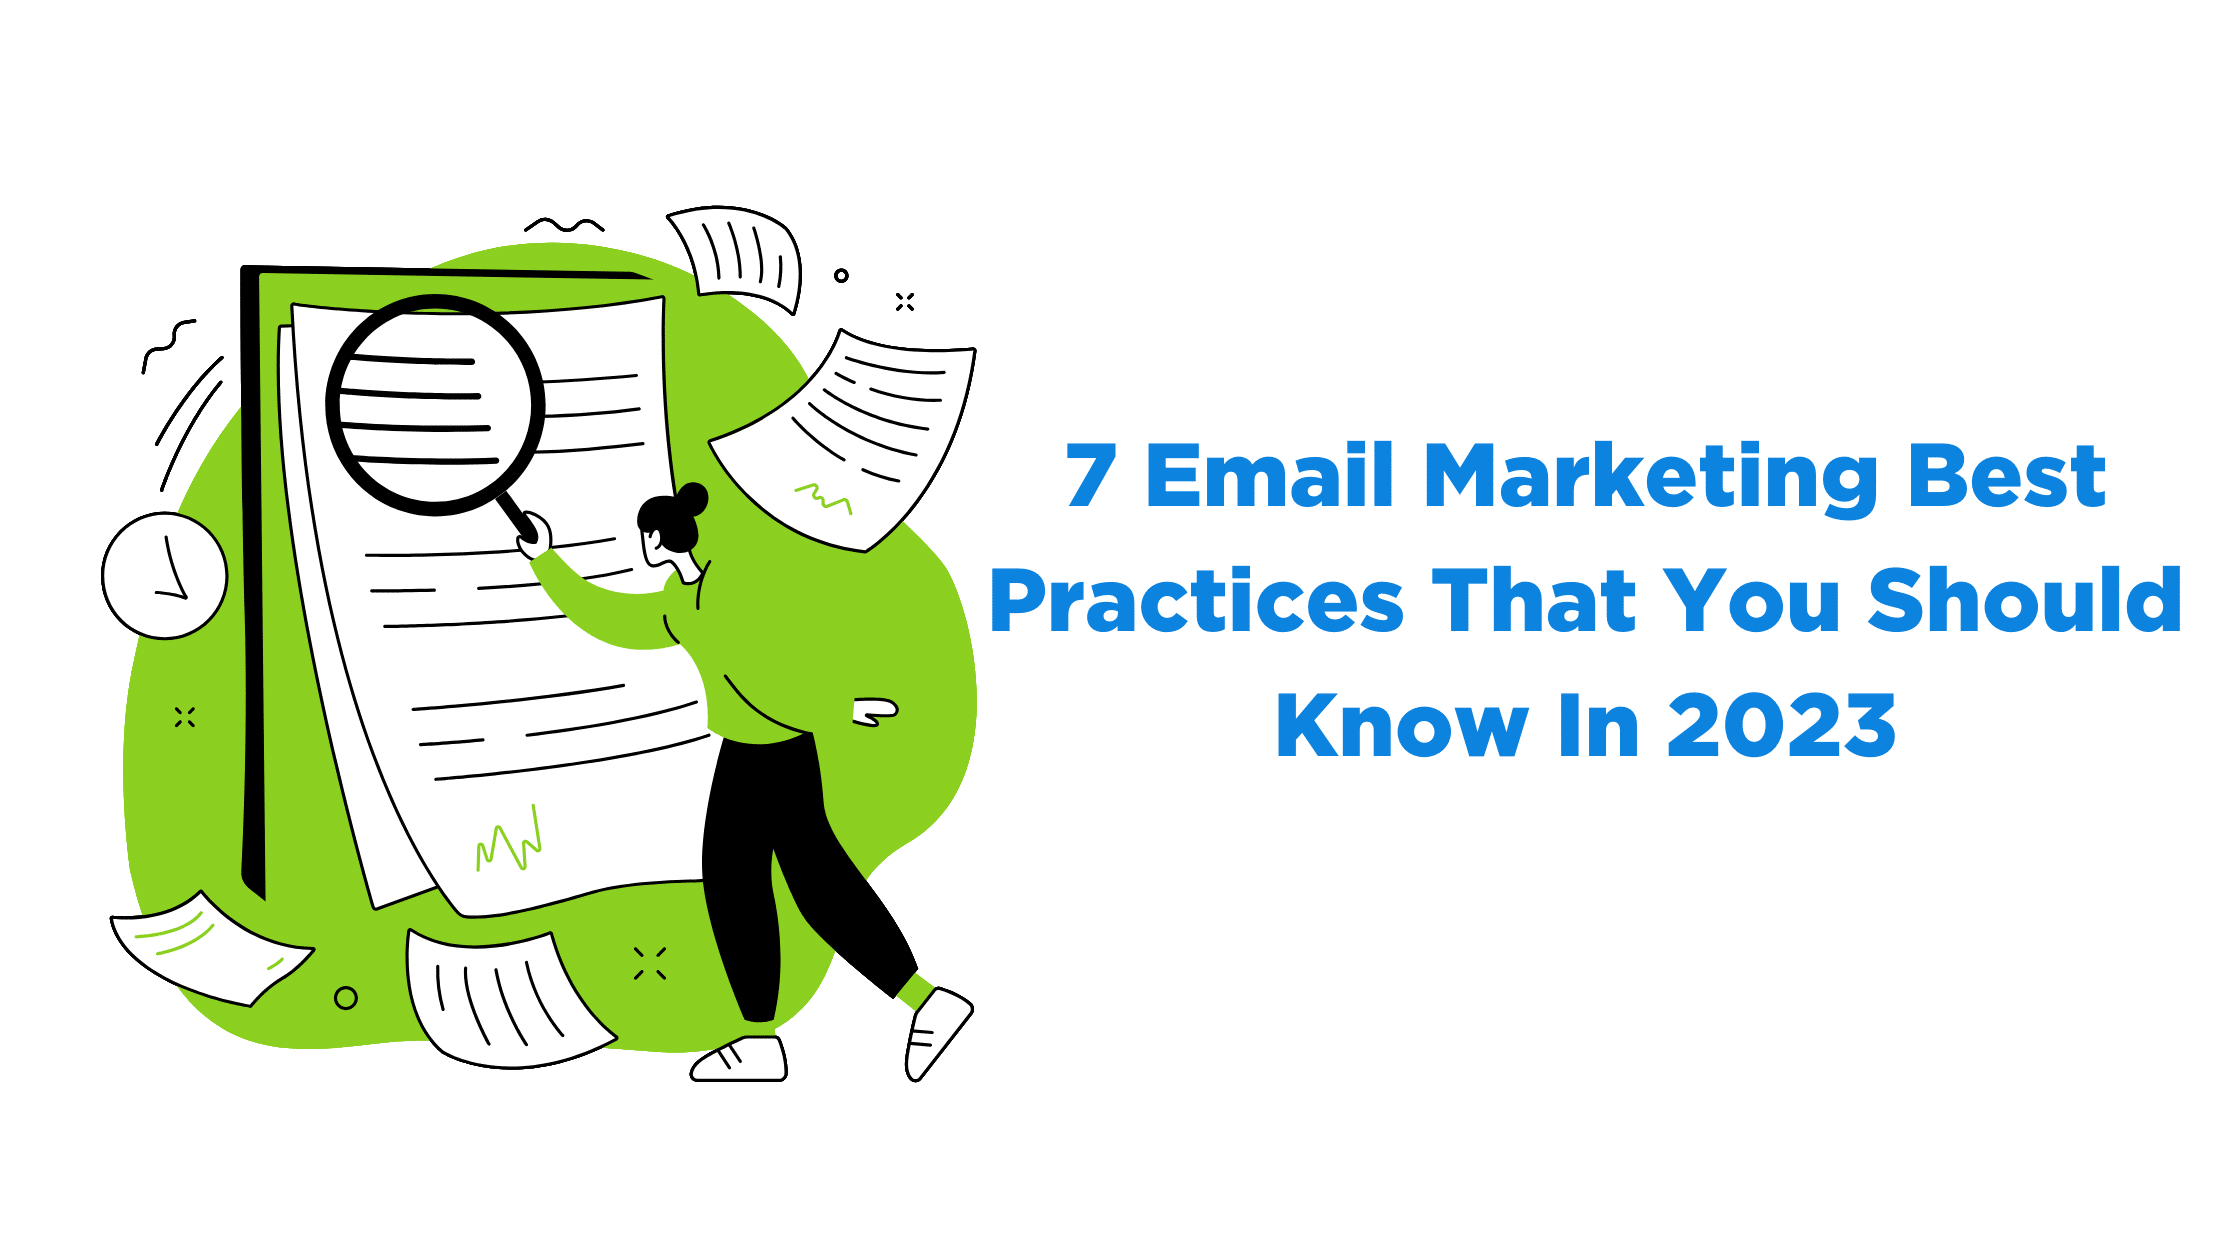 7 Email Marketing Best Practices That You Should Know In 2023